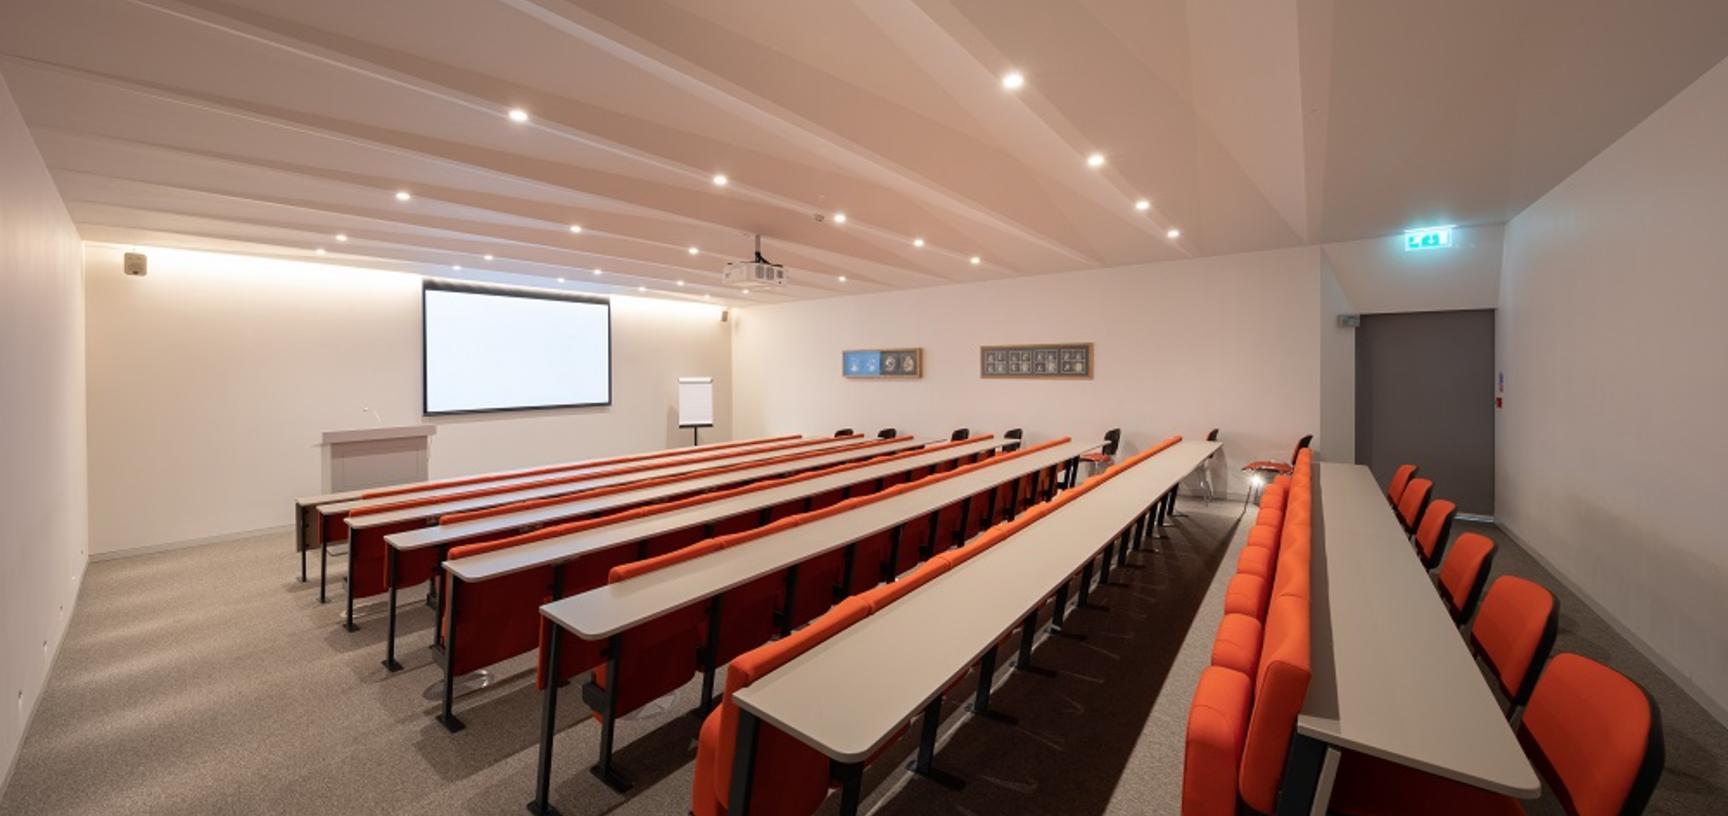 The West Wing Lecture Theatre